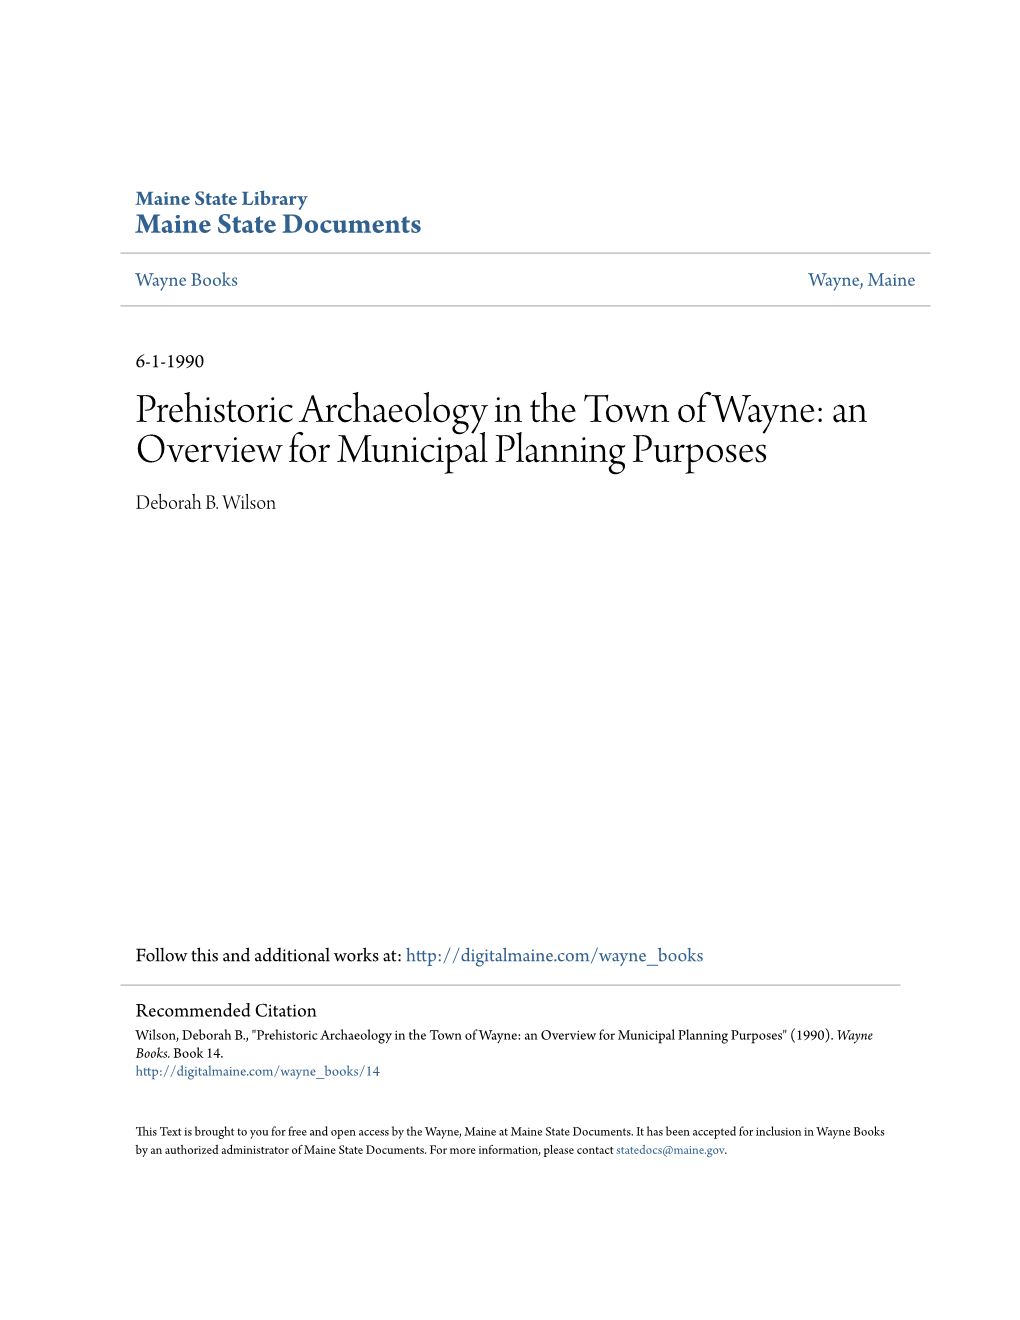 Prehistoric Archaeology in the Town of Wayne: an Overview for Municipal Planning Purposes Deborah B